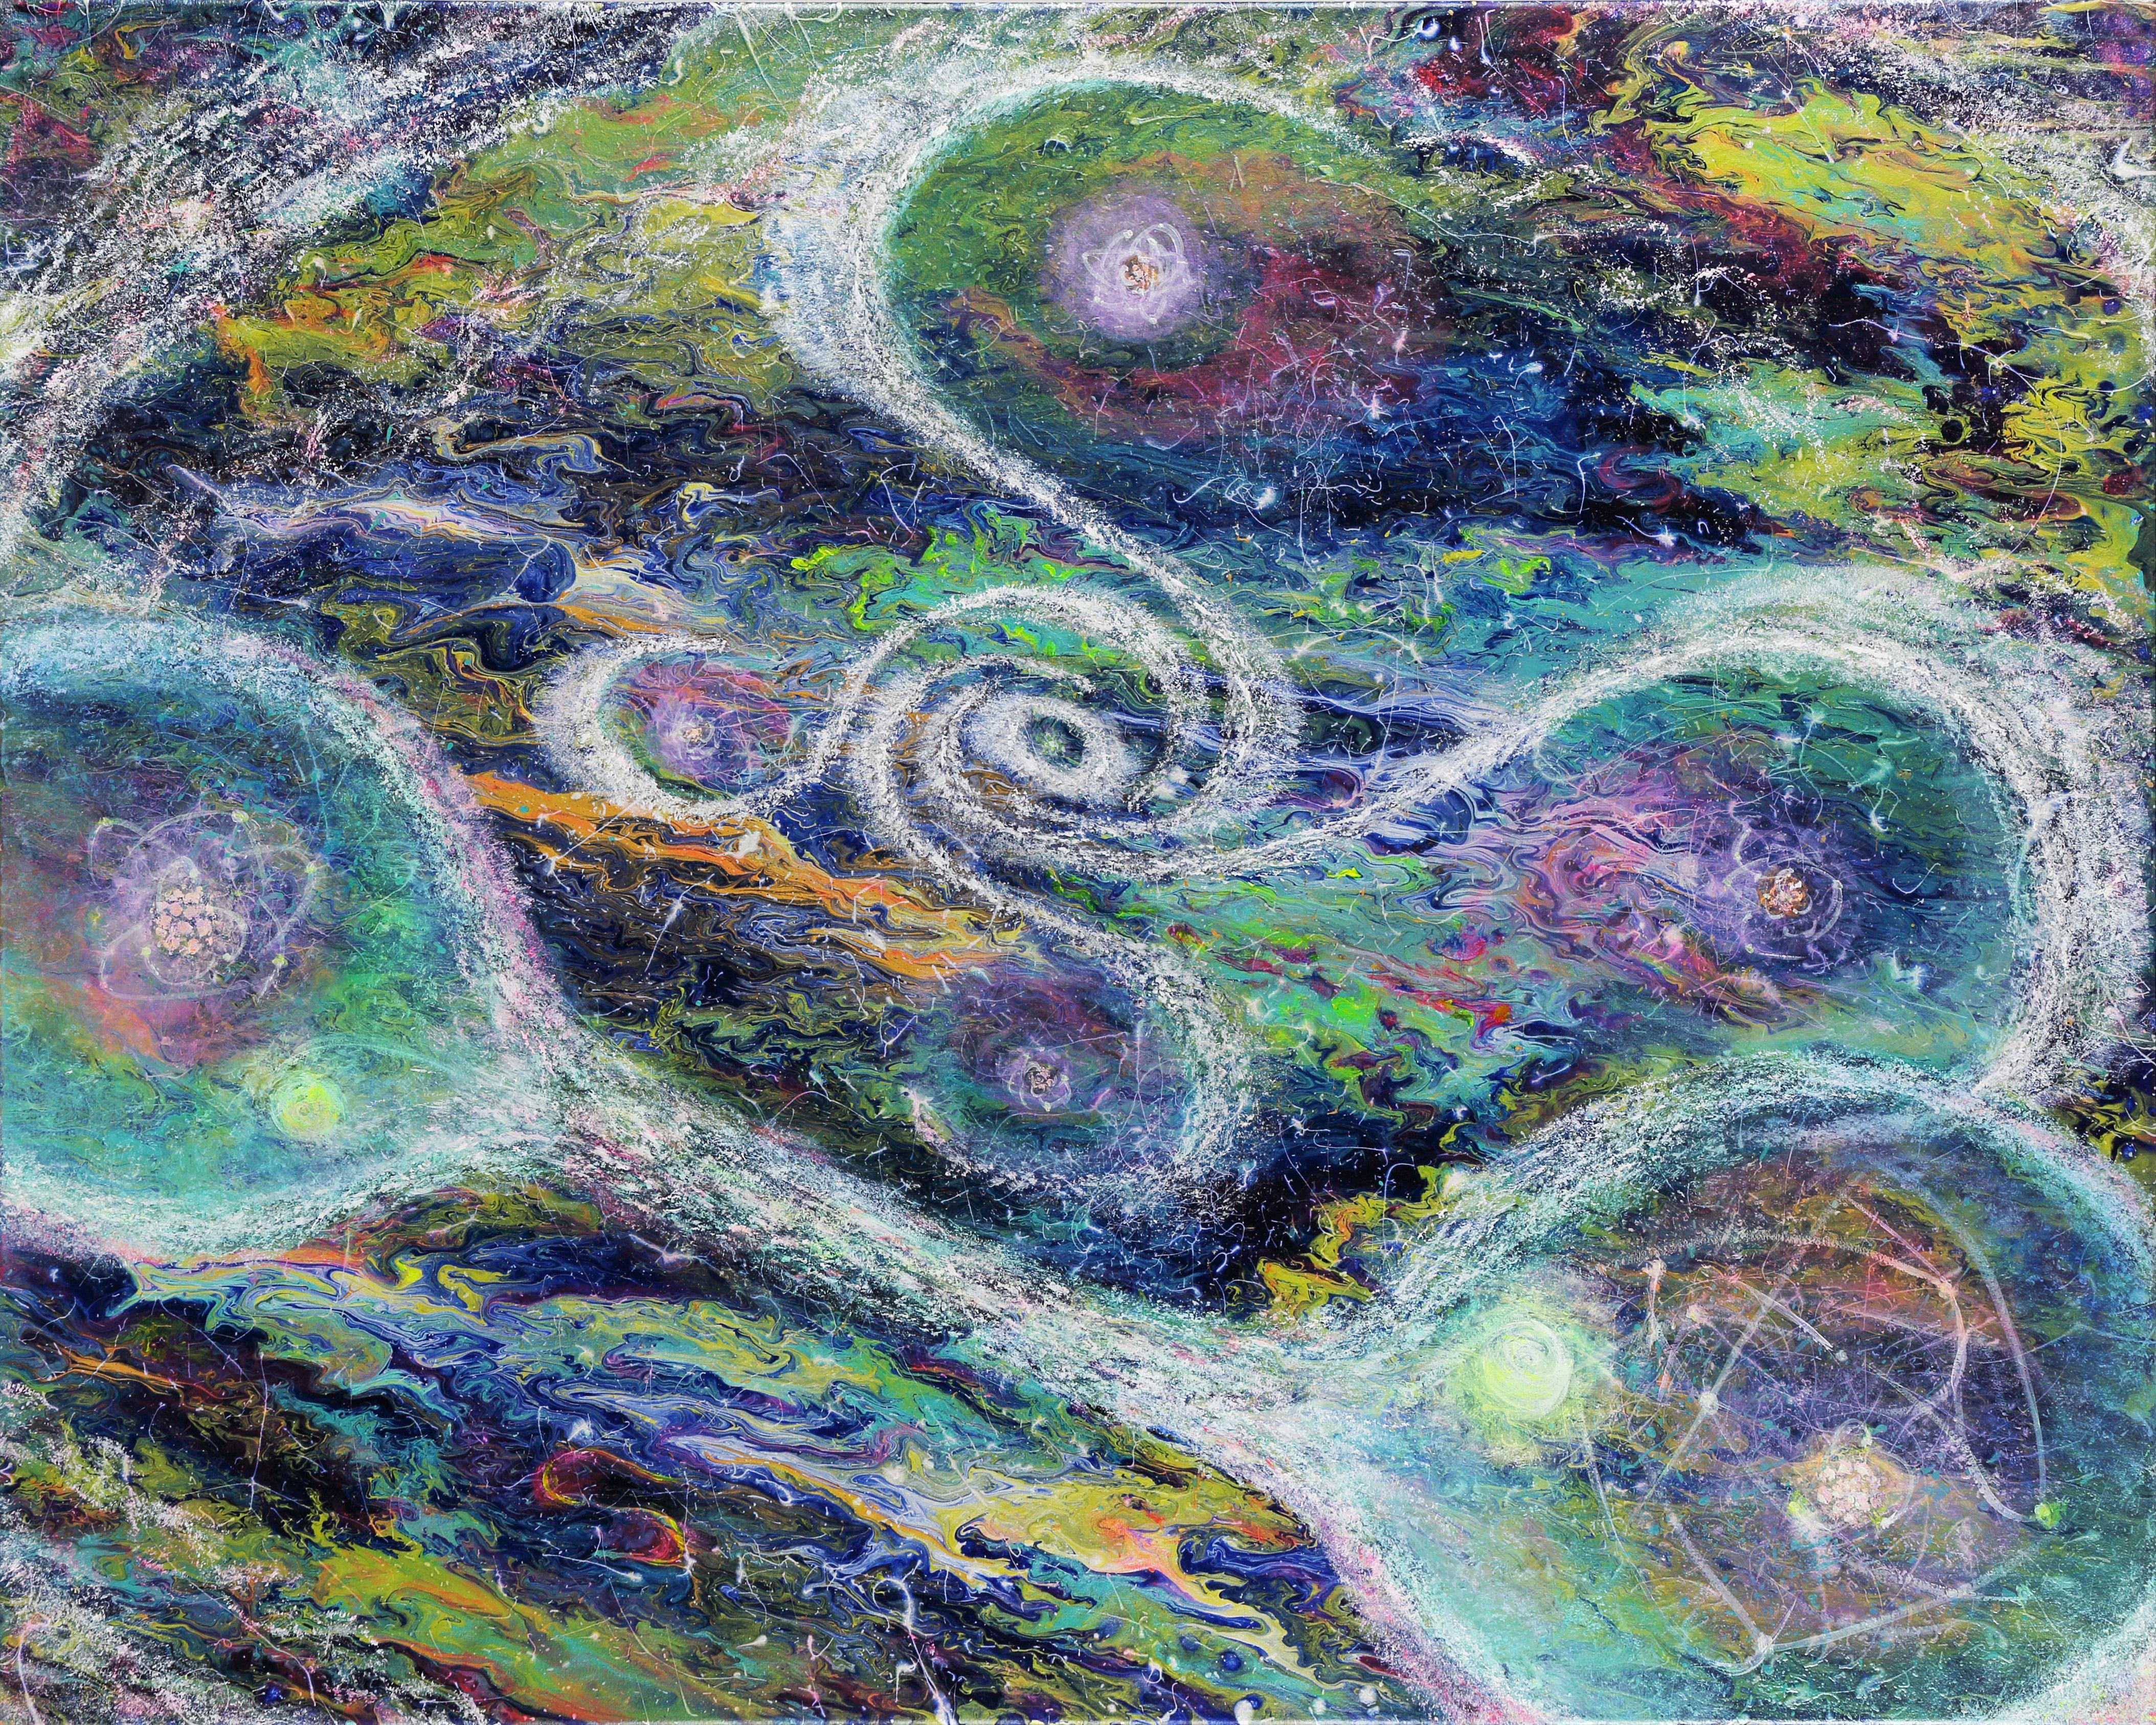 Olena Smal Abstract Painting - "Waltz of the Universe", “Metaphysics” series